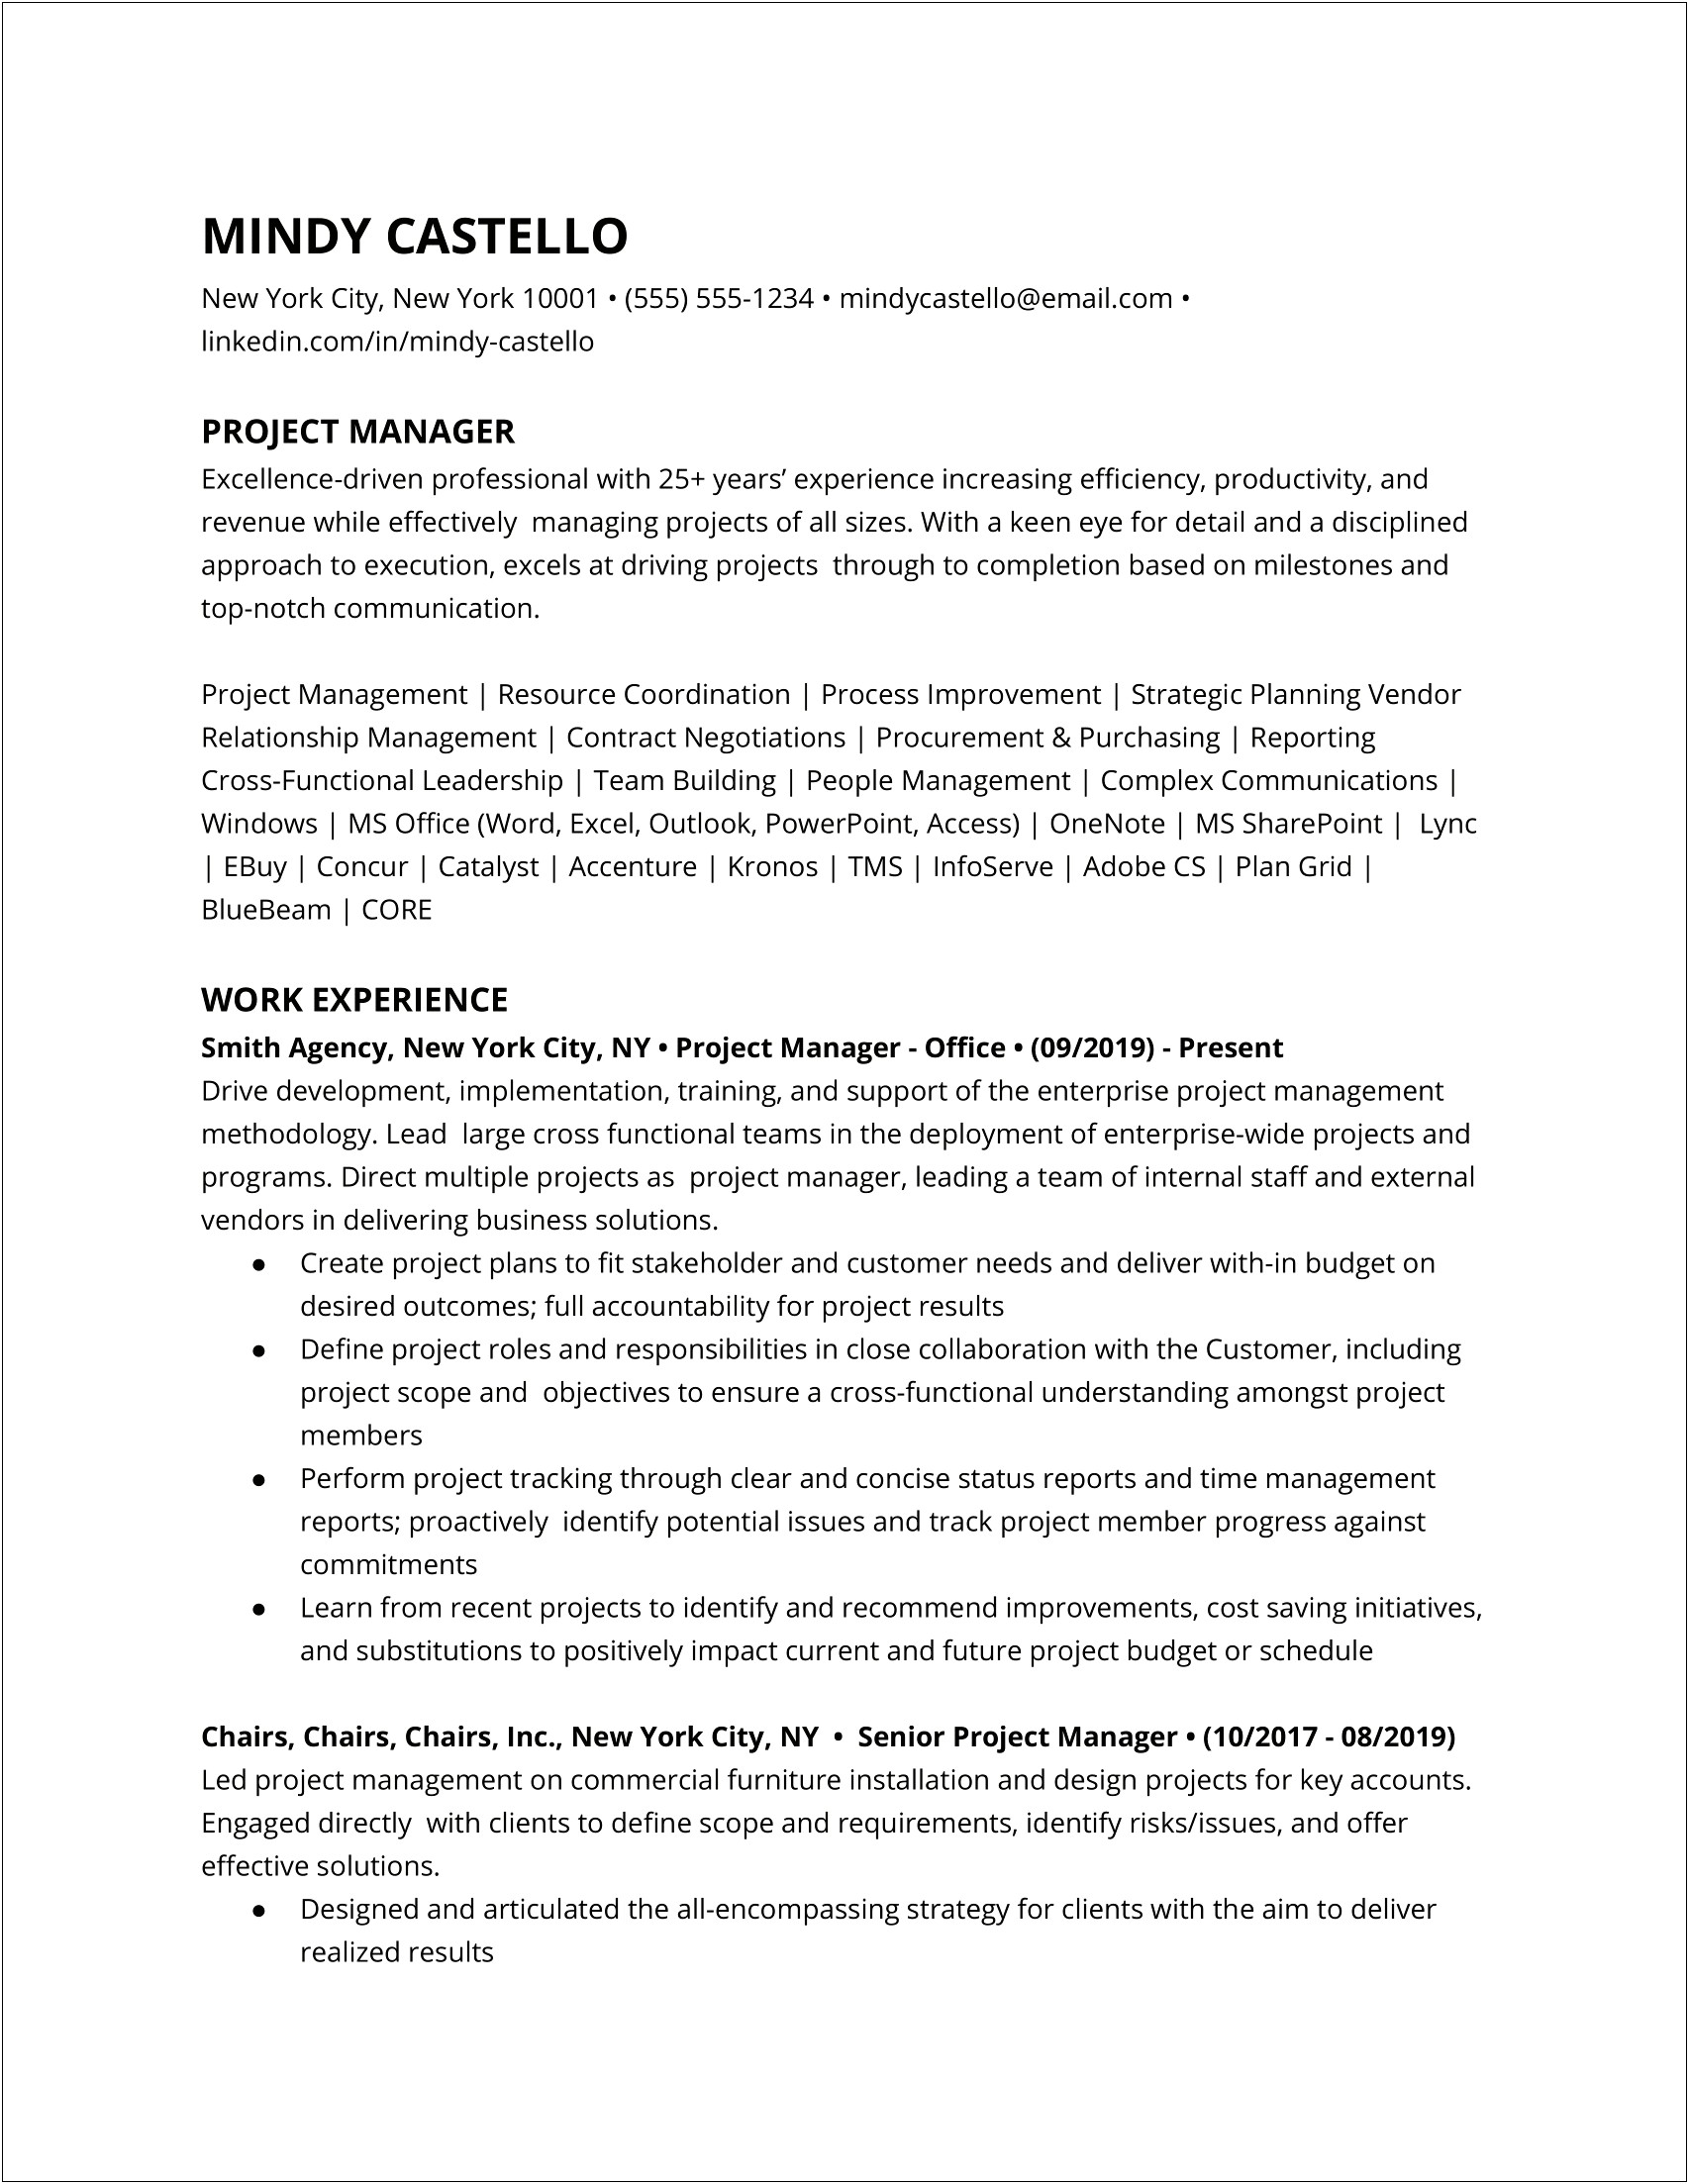 Sample Sales Force Project Manager Resume